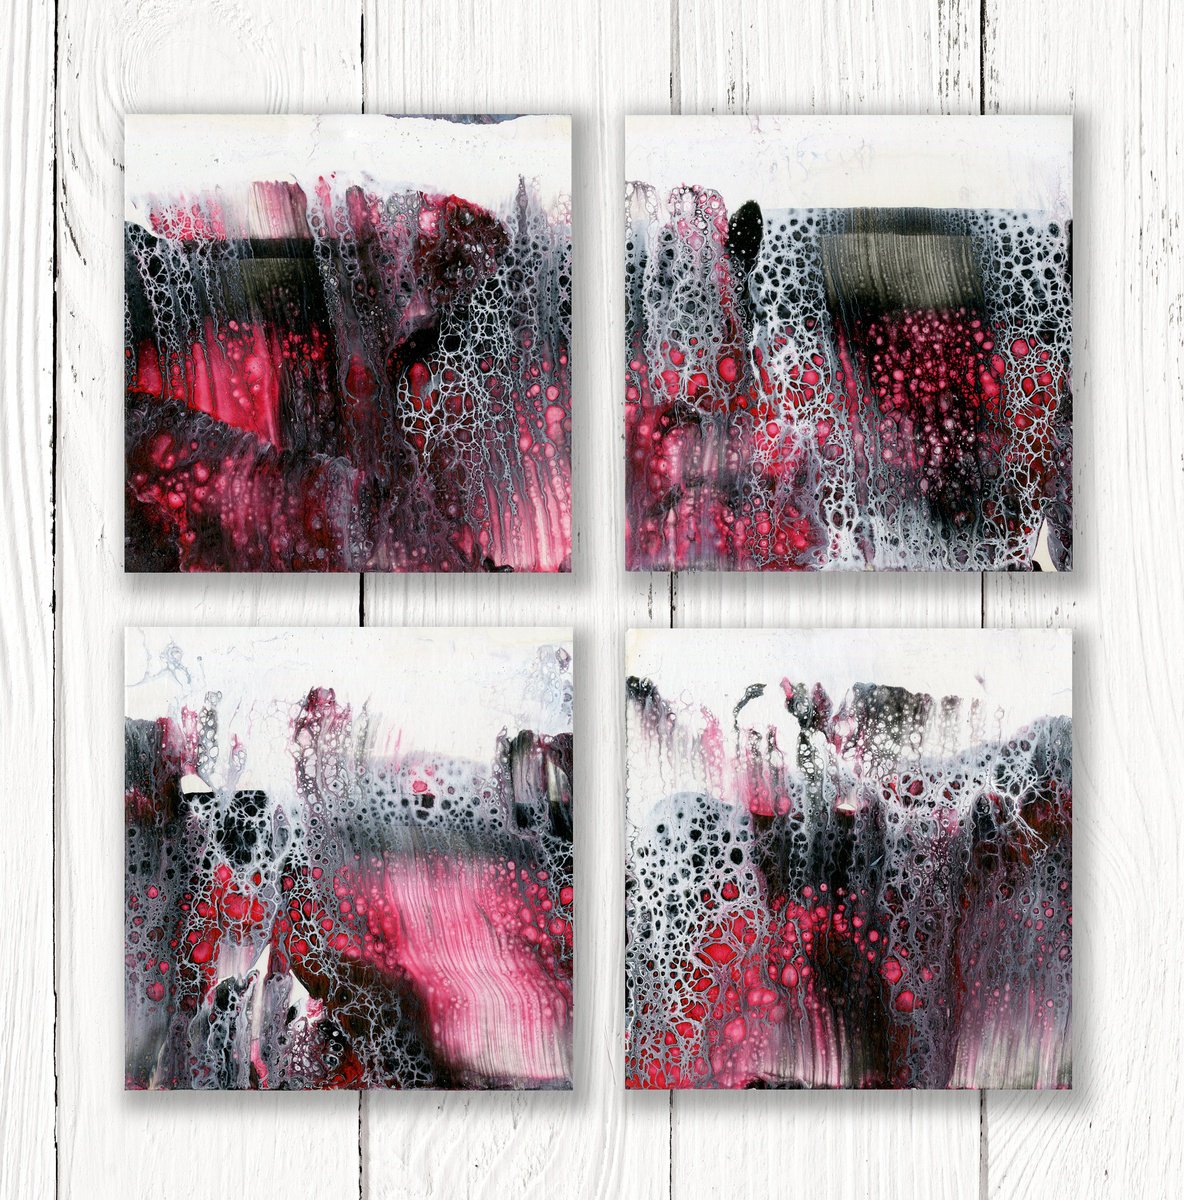 A Creative Soul Collection 1 - 4 Small Abstract Paintings by Kathy Morton Stanion by Kathy Morton Stanion